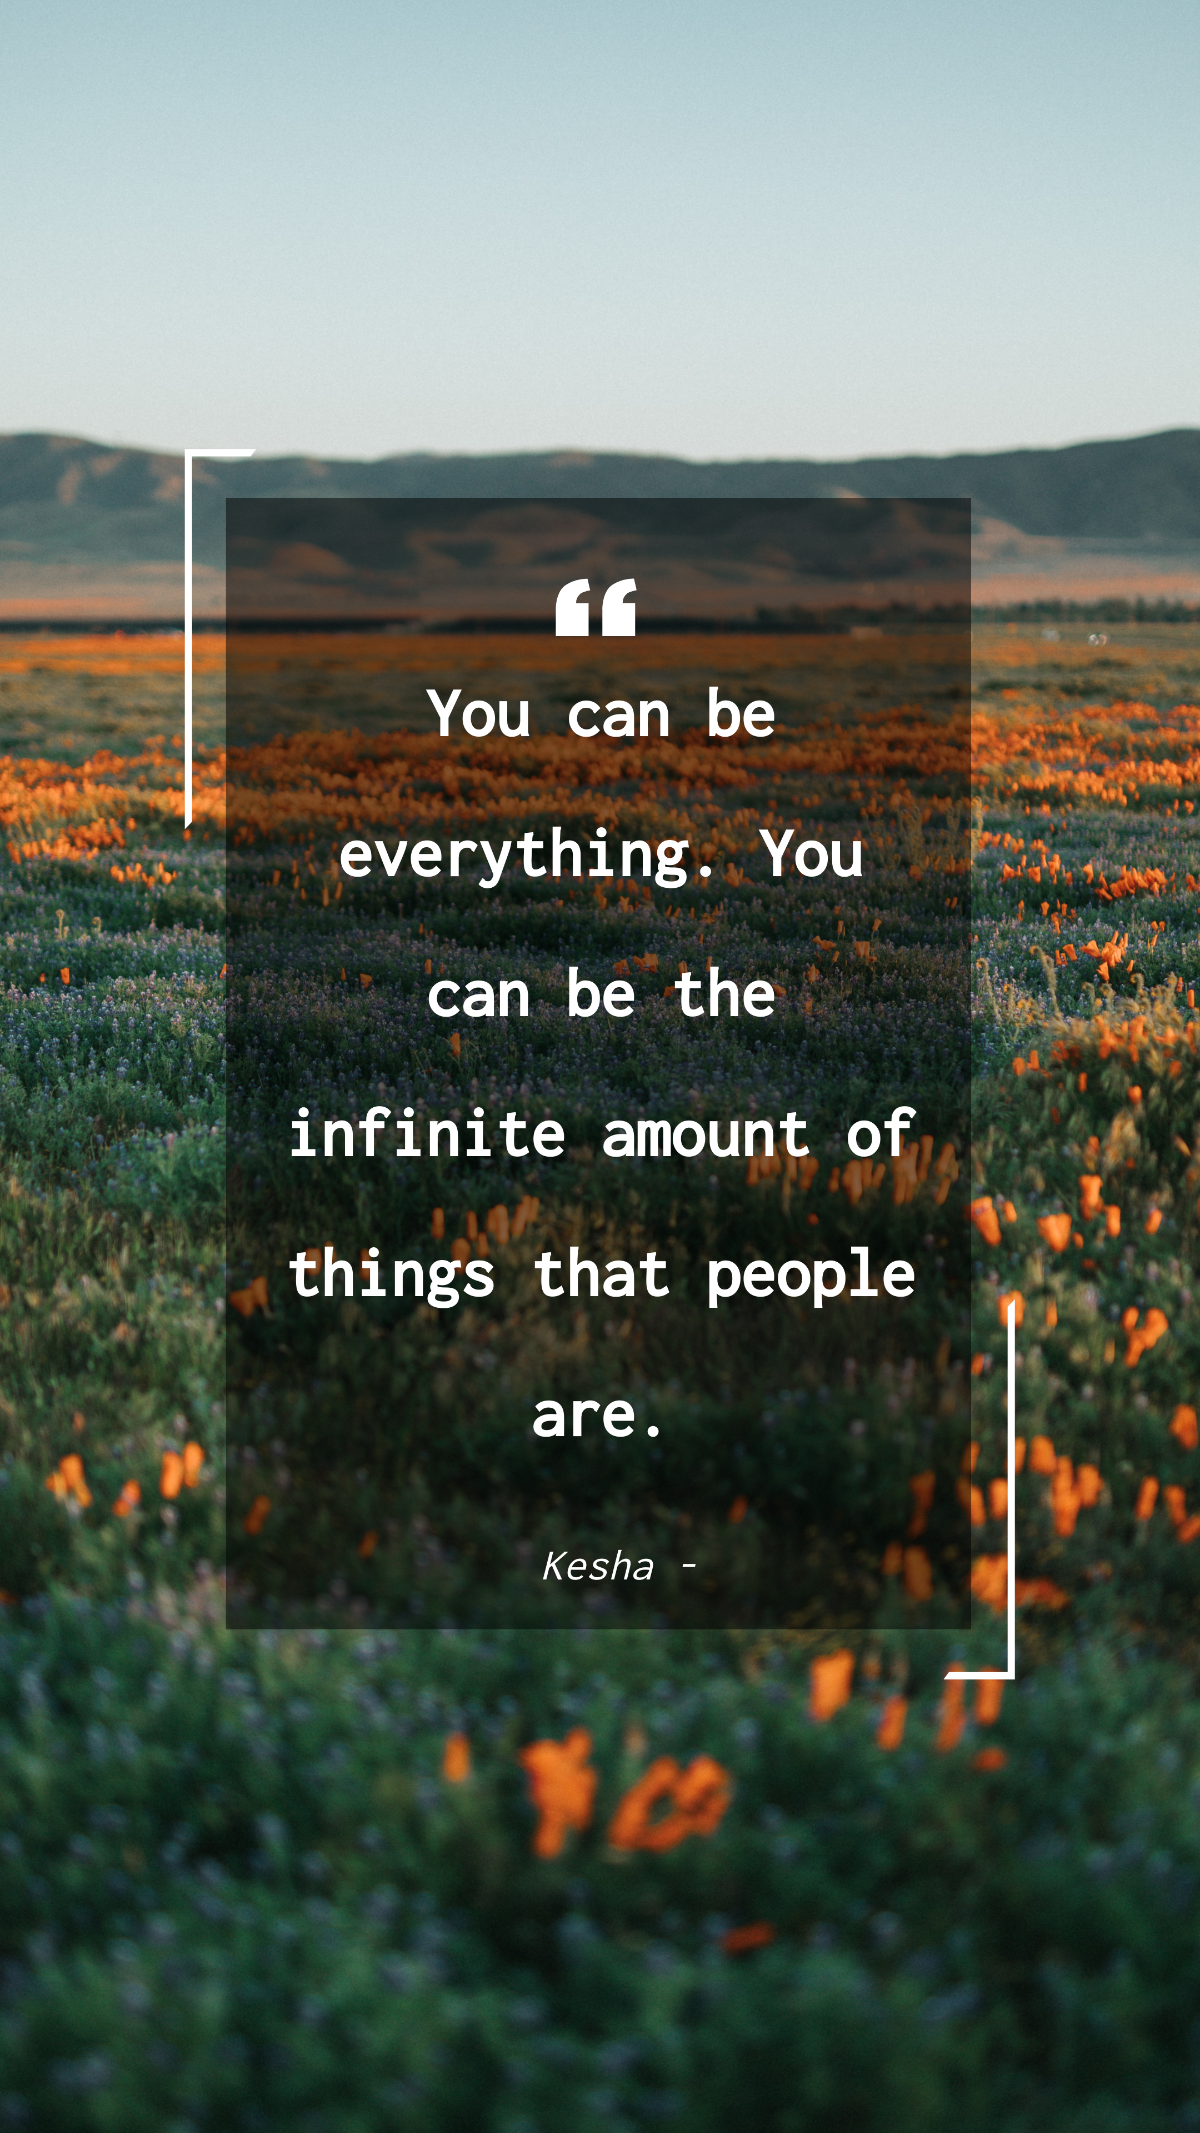 Kesha - You can be everything. You can be the infinite amount of things that people are. Template